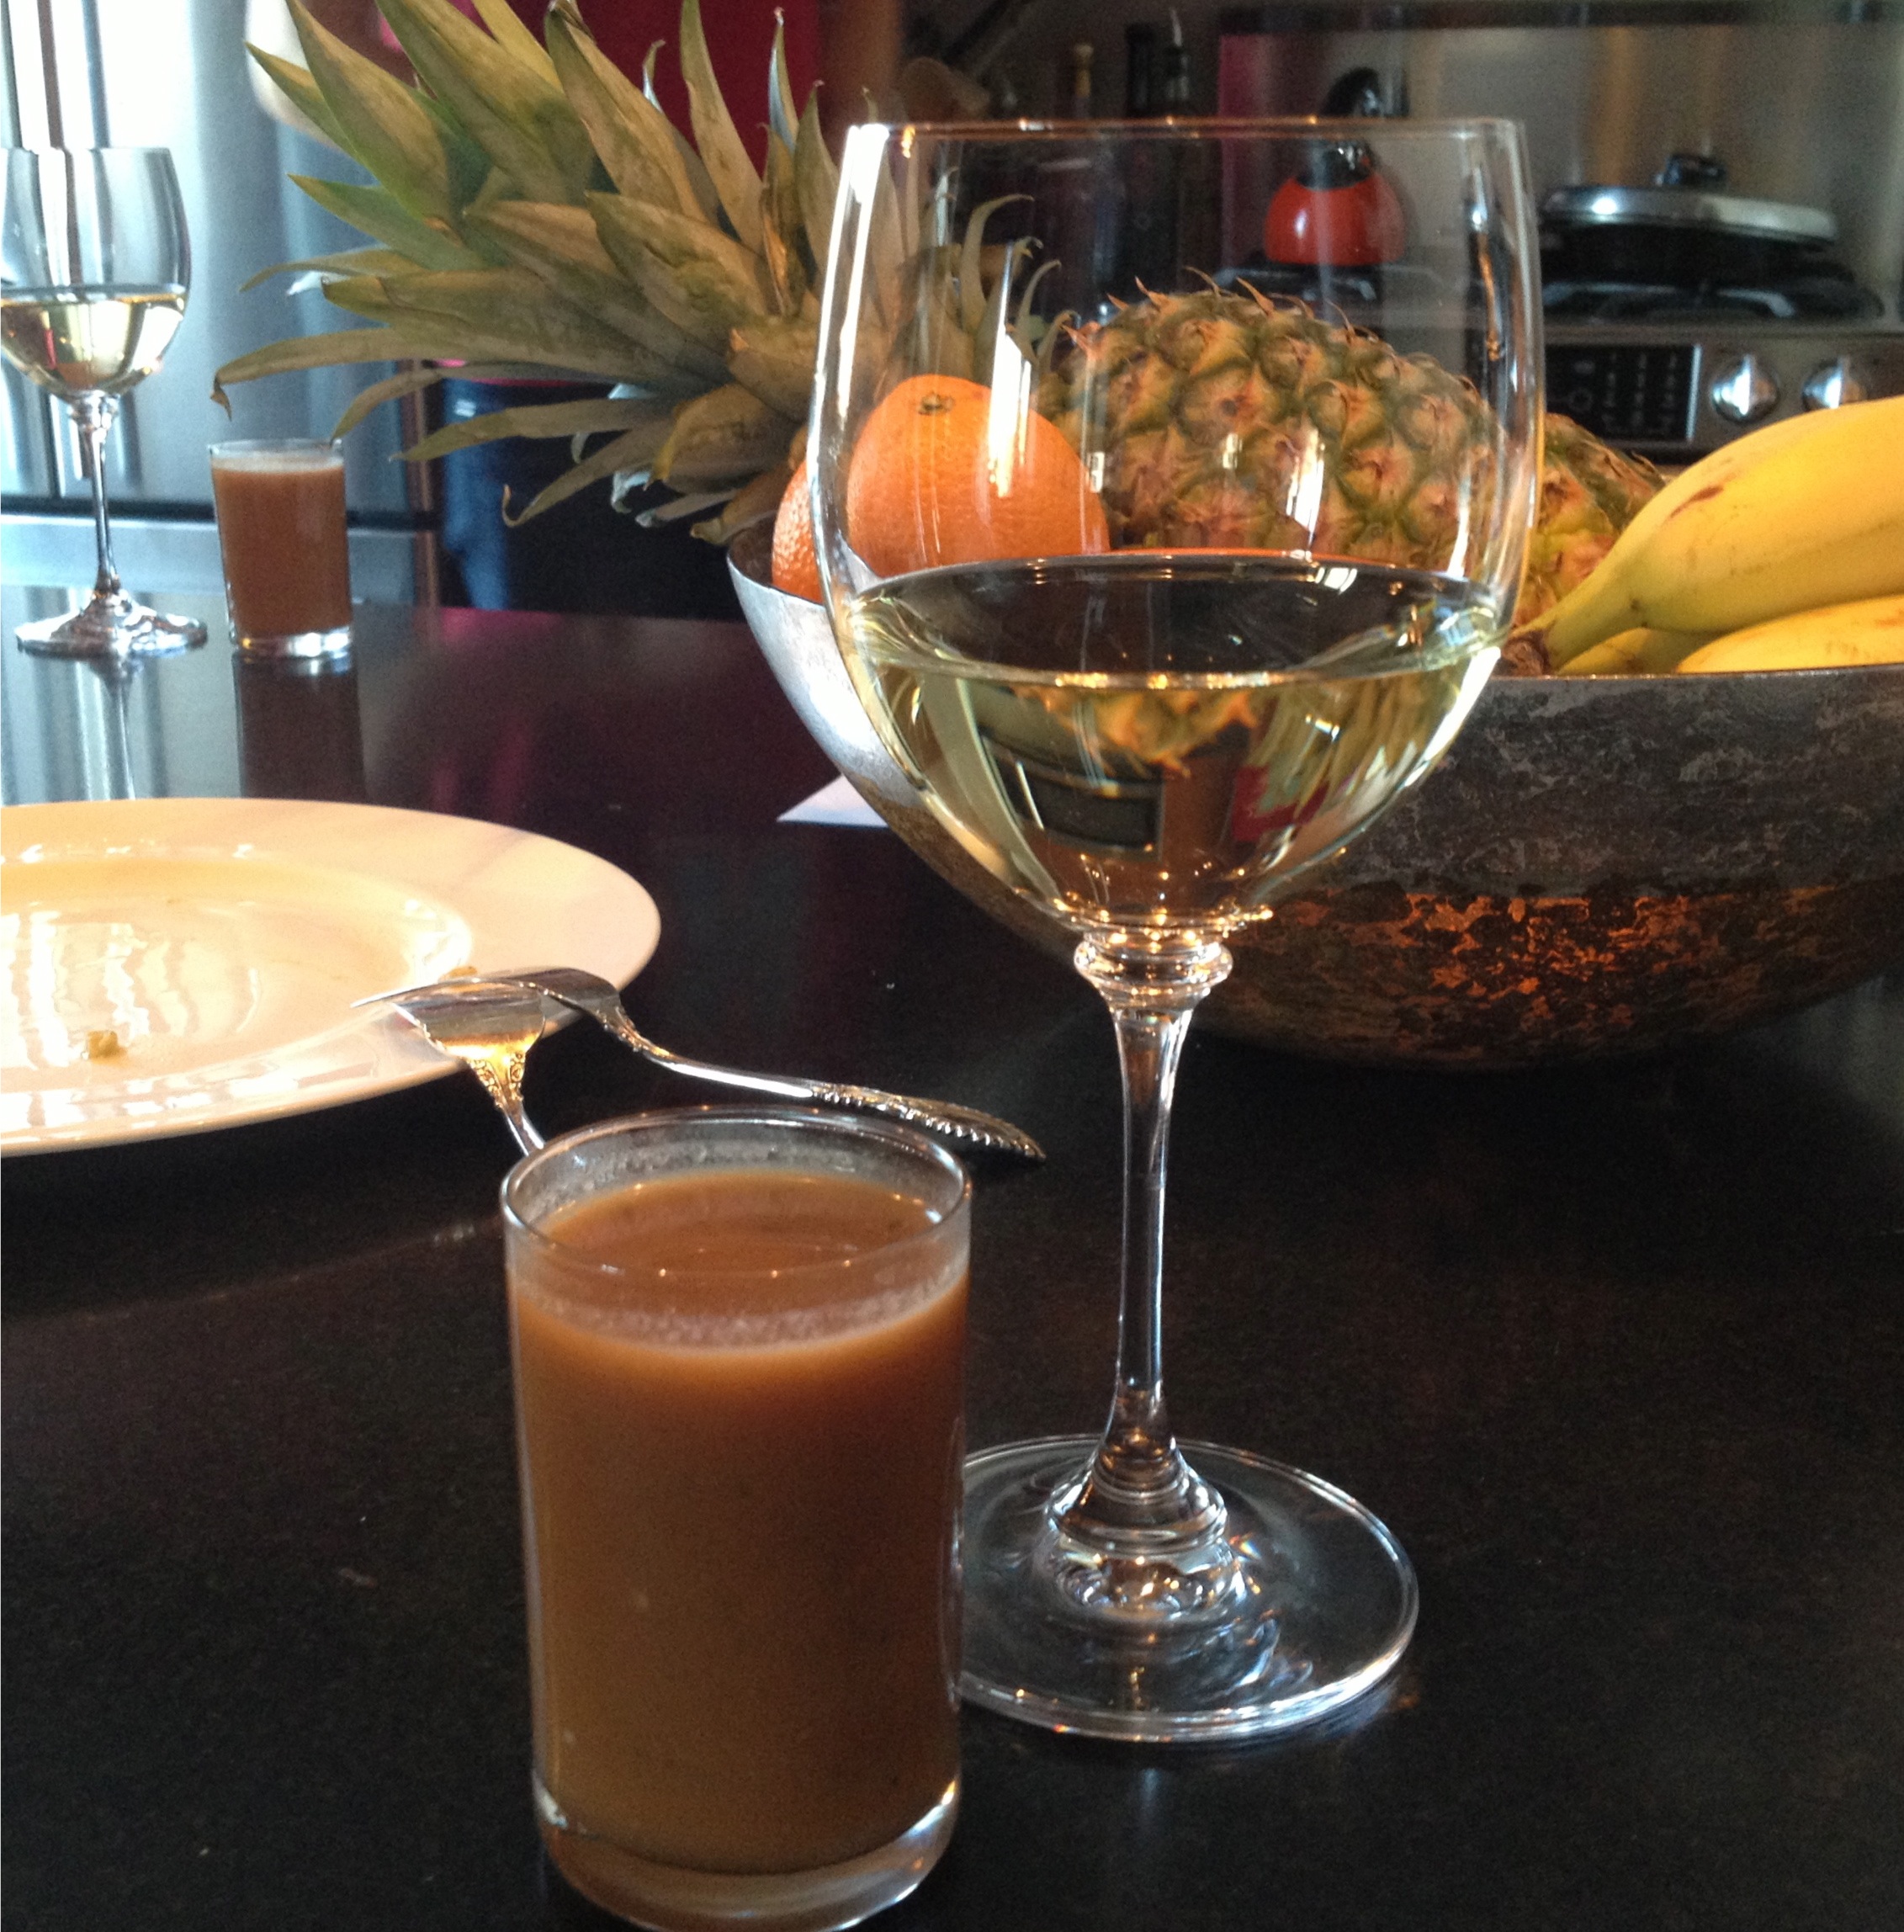 Gazpacho served in a glass, recipe from The French Laundry cookbook with a glass of Vouvray wine.